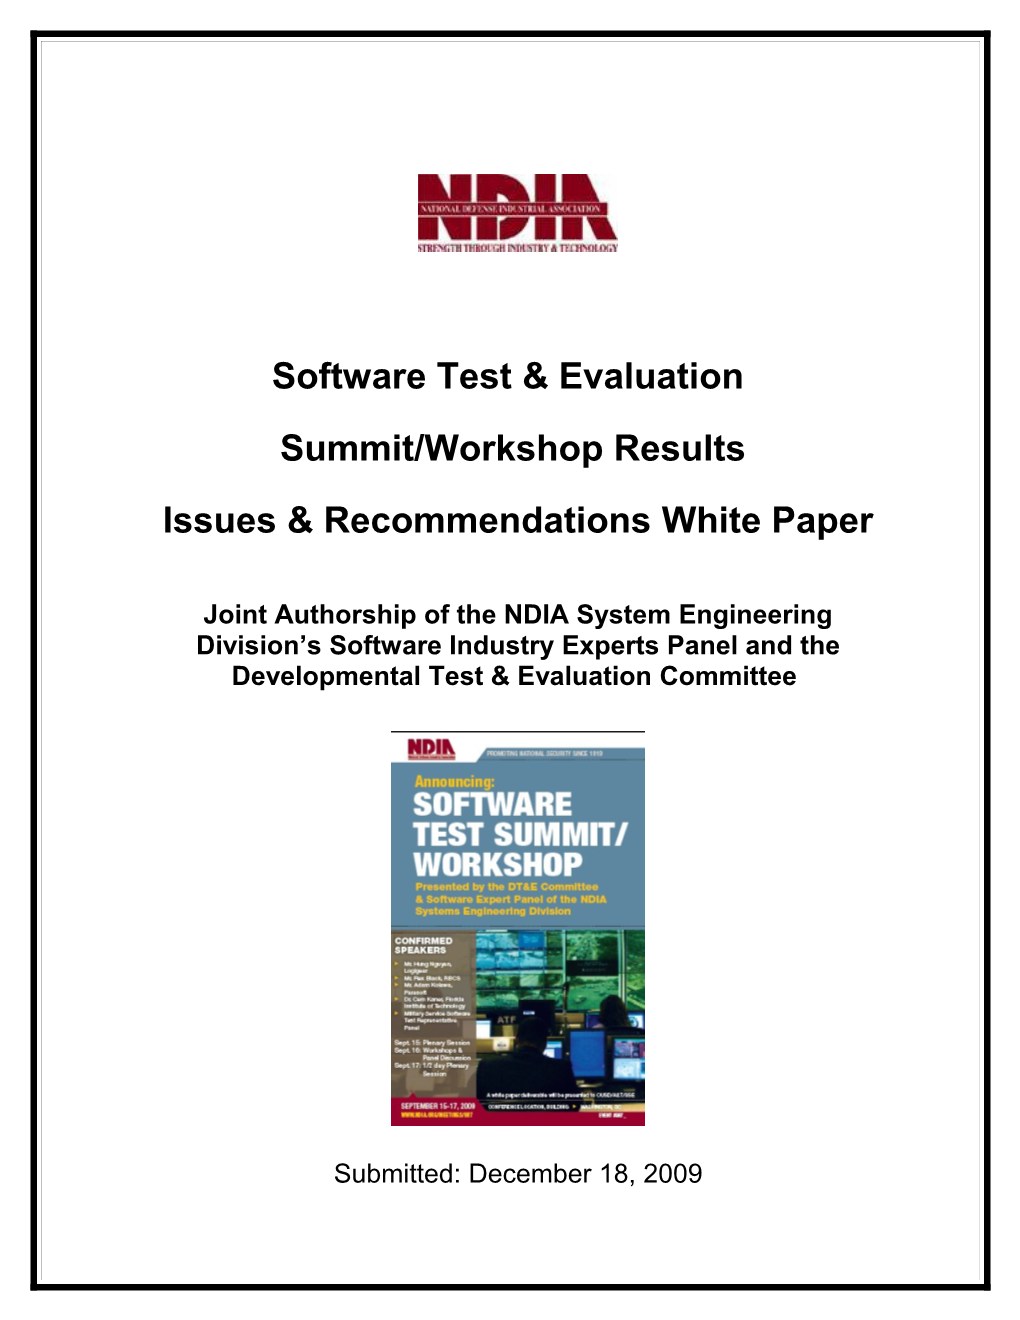 Software T&E Summit/Workshop Issues & Recommendations White Paper